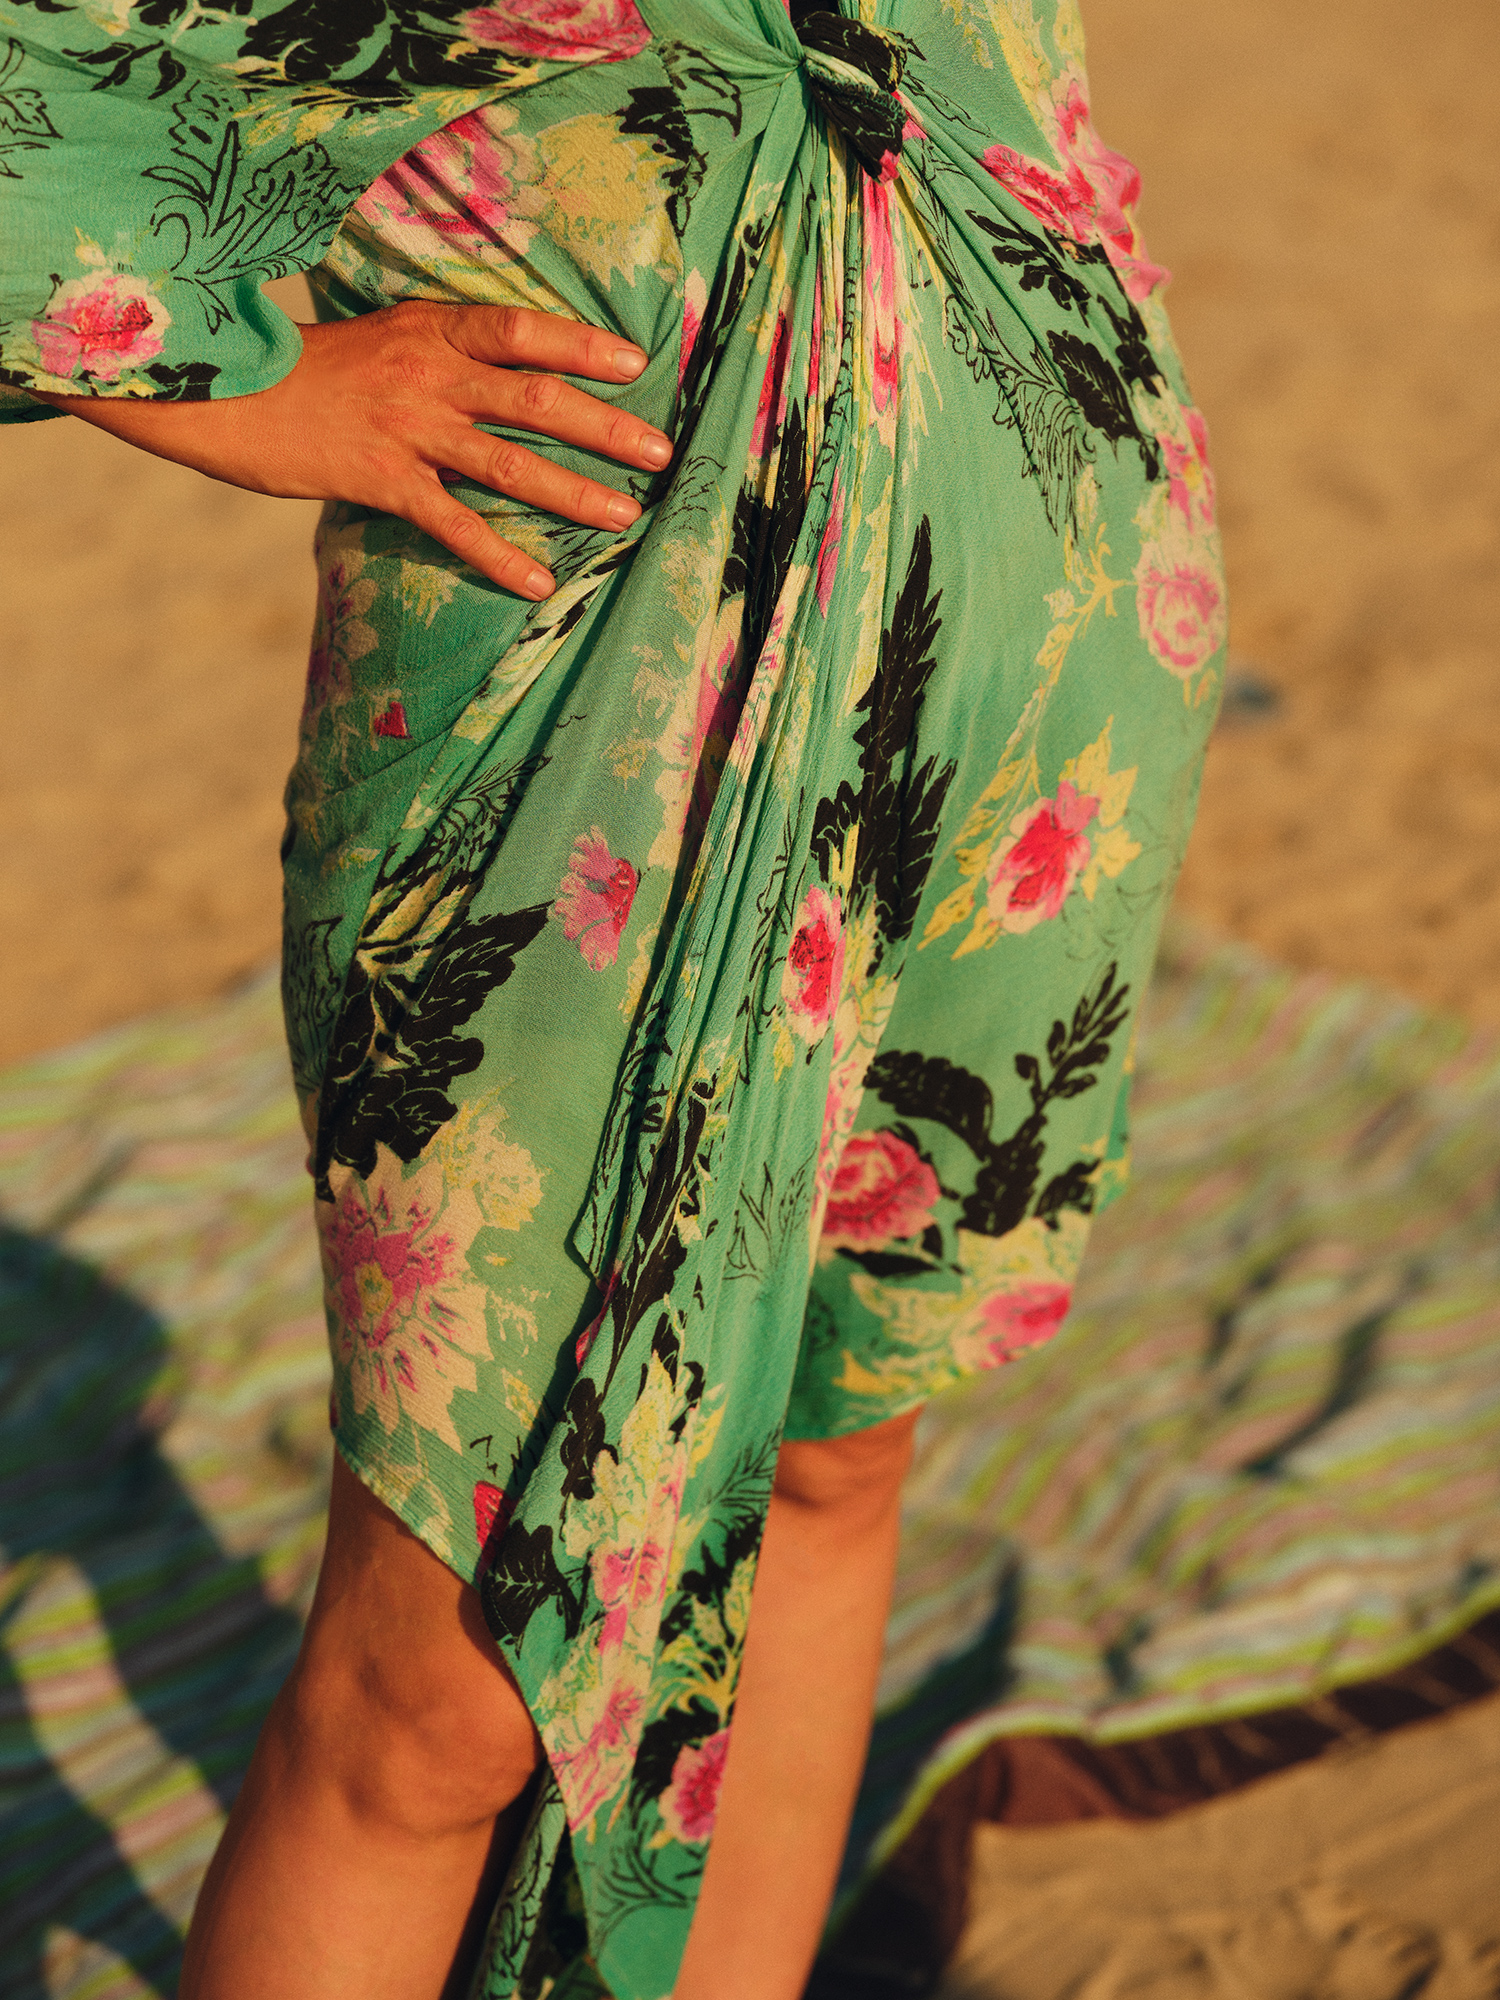 Lower half of a woman standing at the beach in a green dress with flowers on it